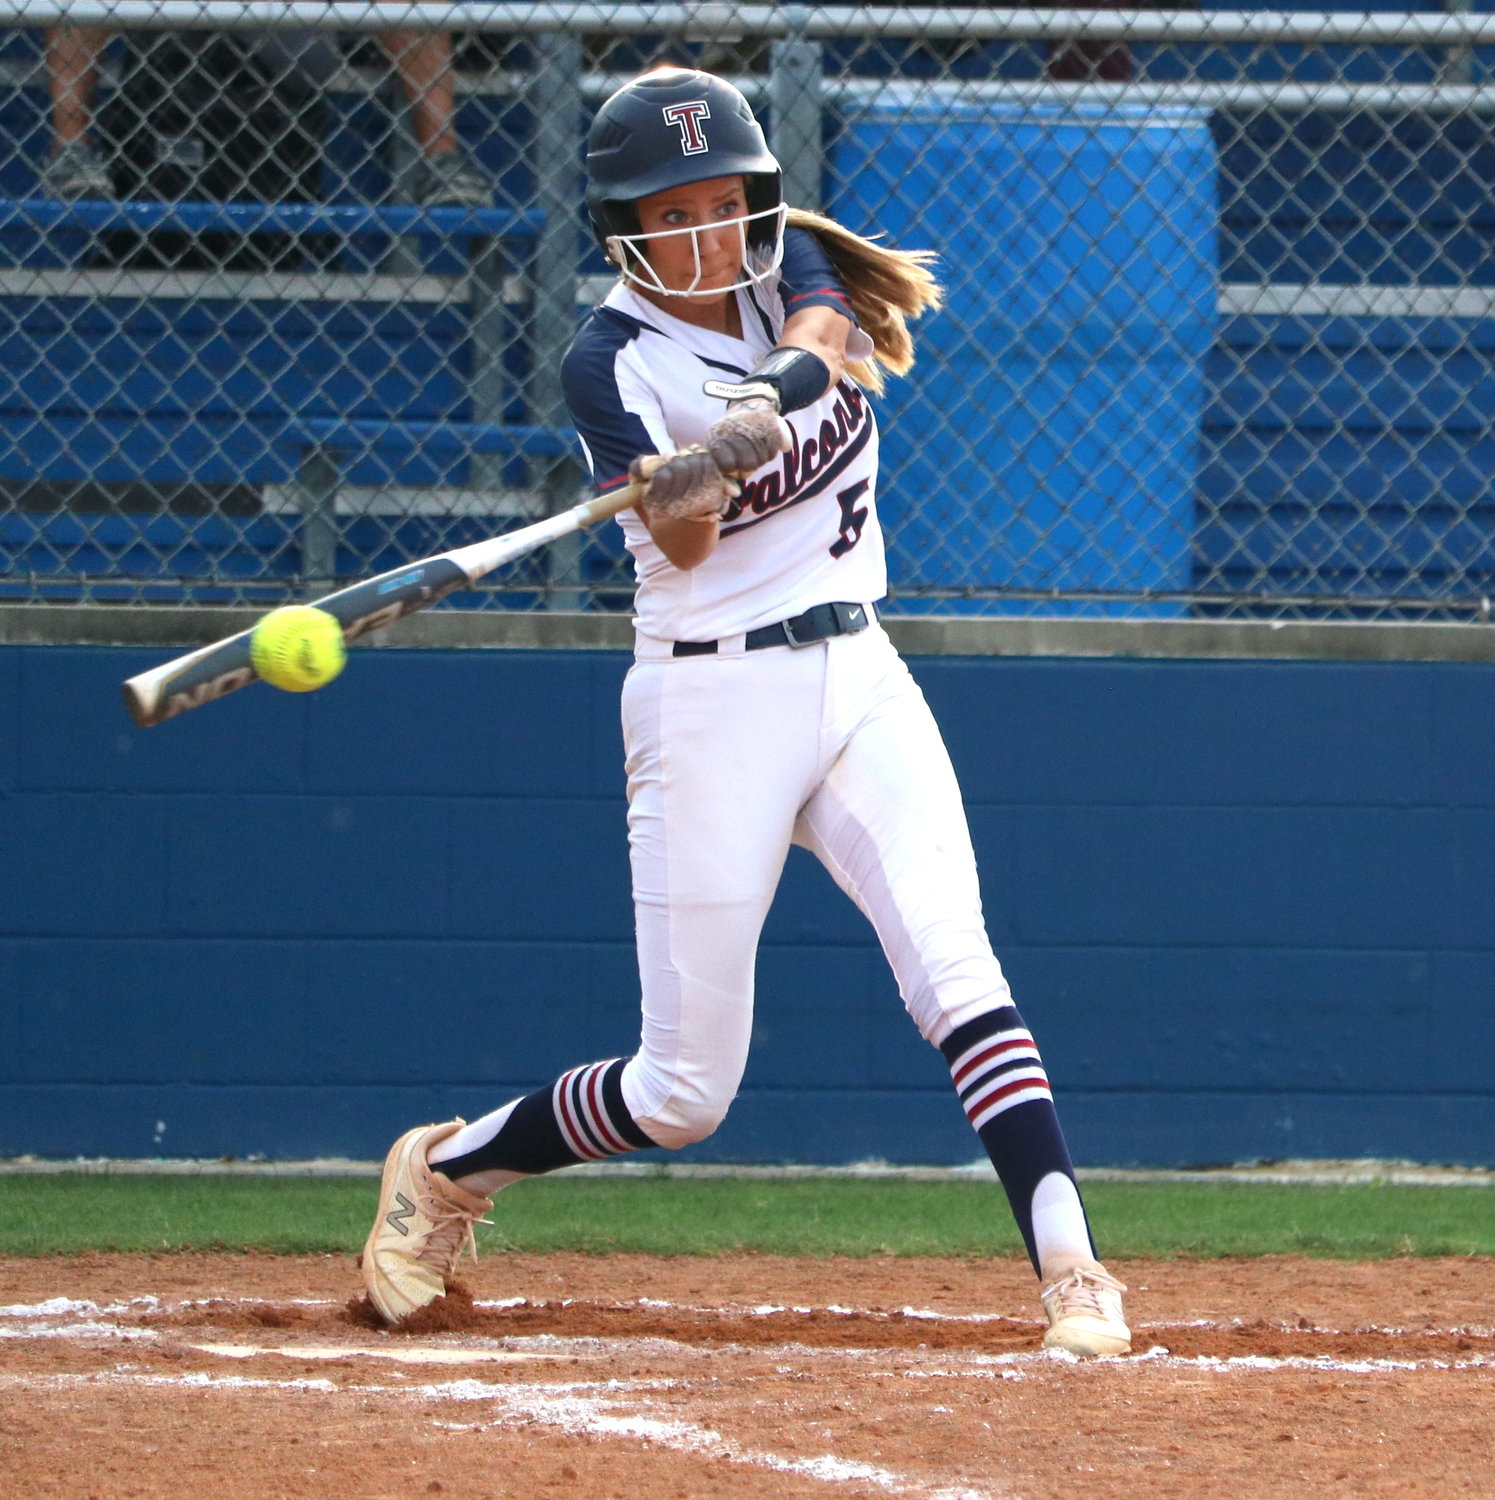 Madison Besselman hits during Thursday’s bi-district game between Tompkins and George Ranch at the Tompkins softball field.